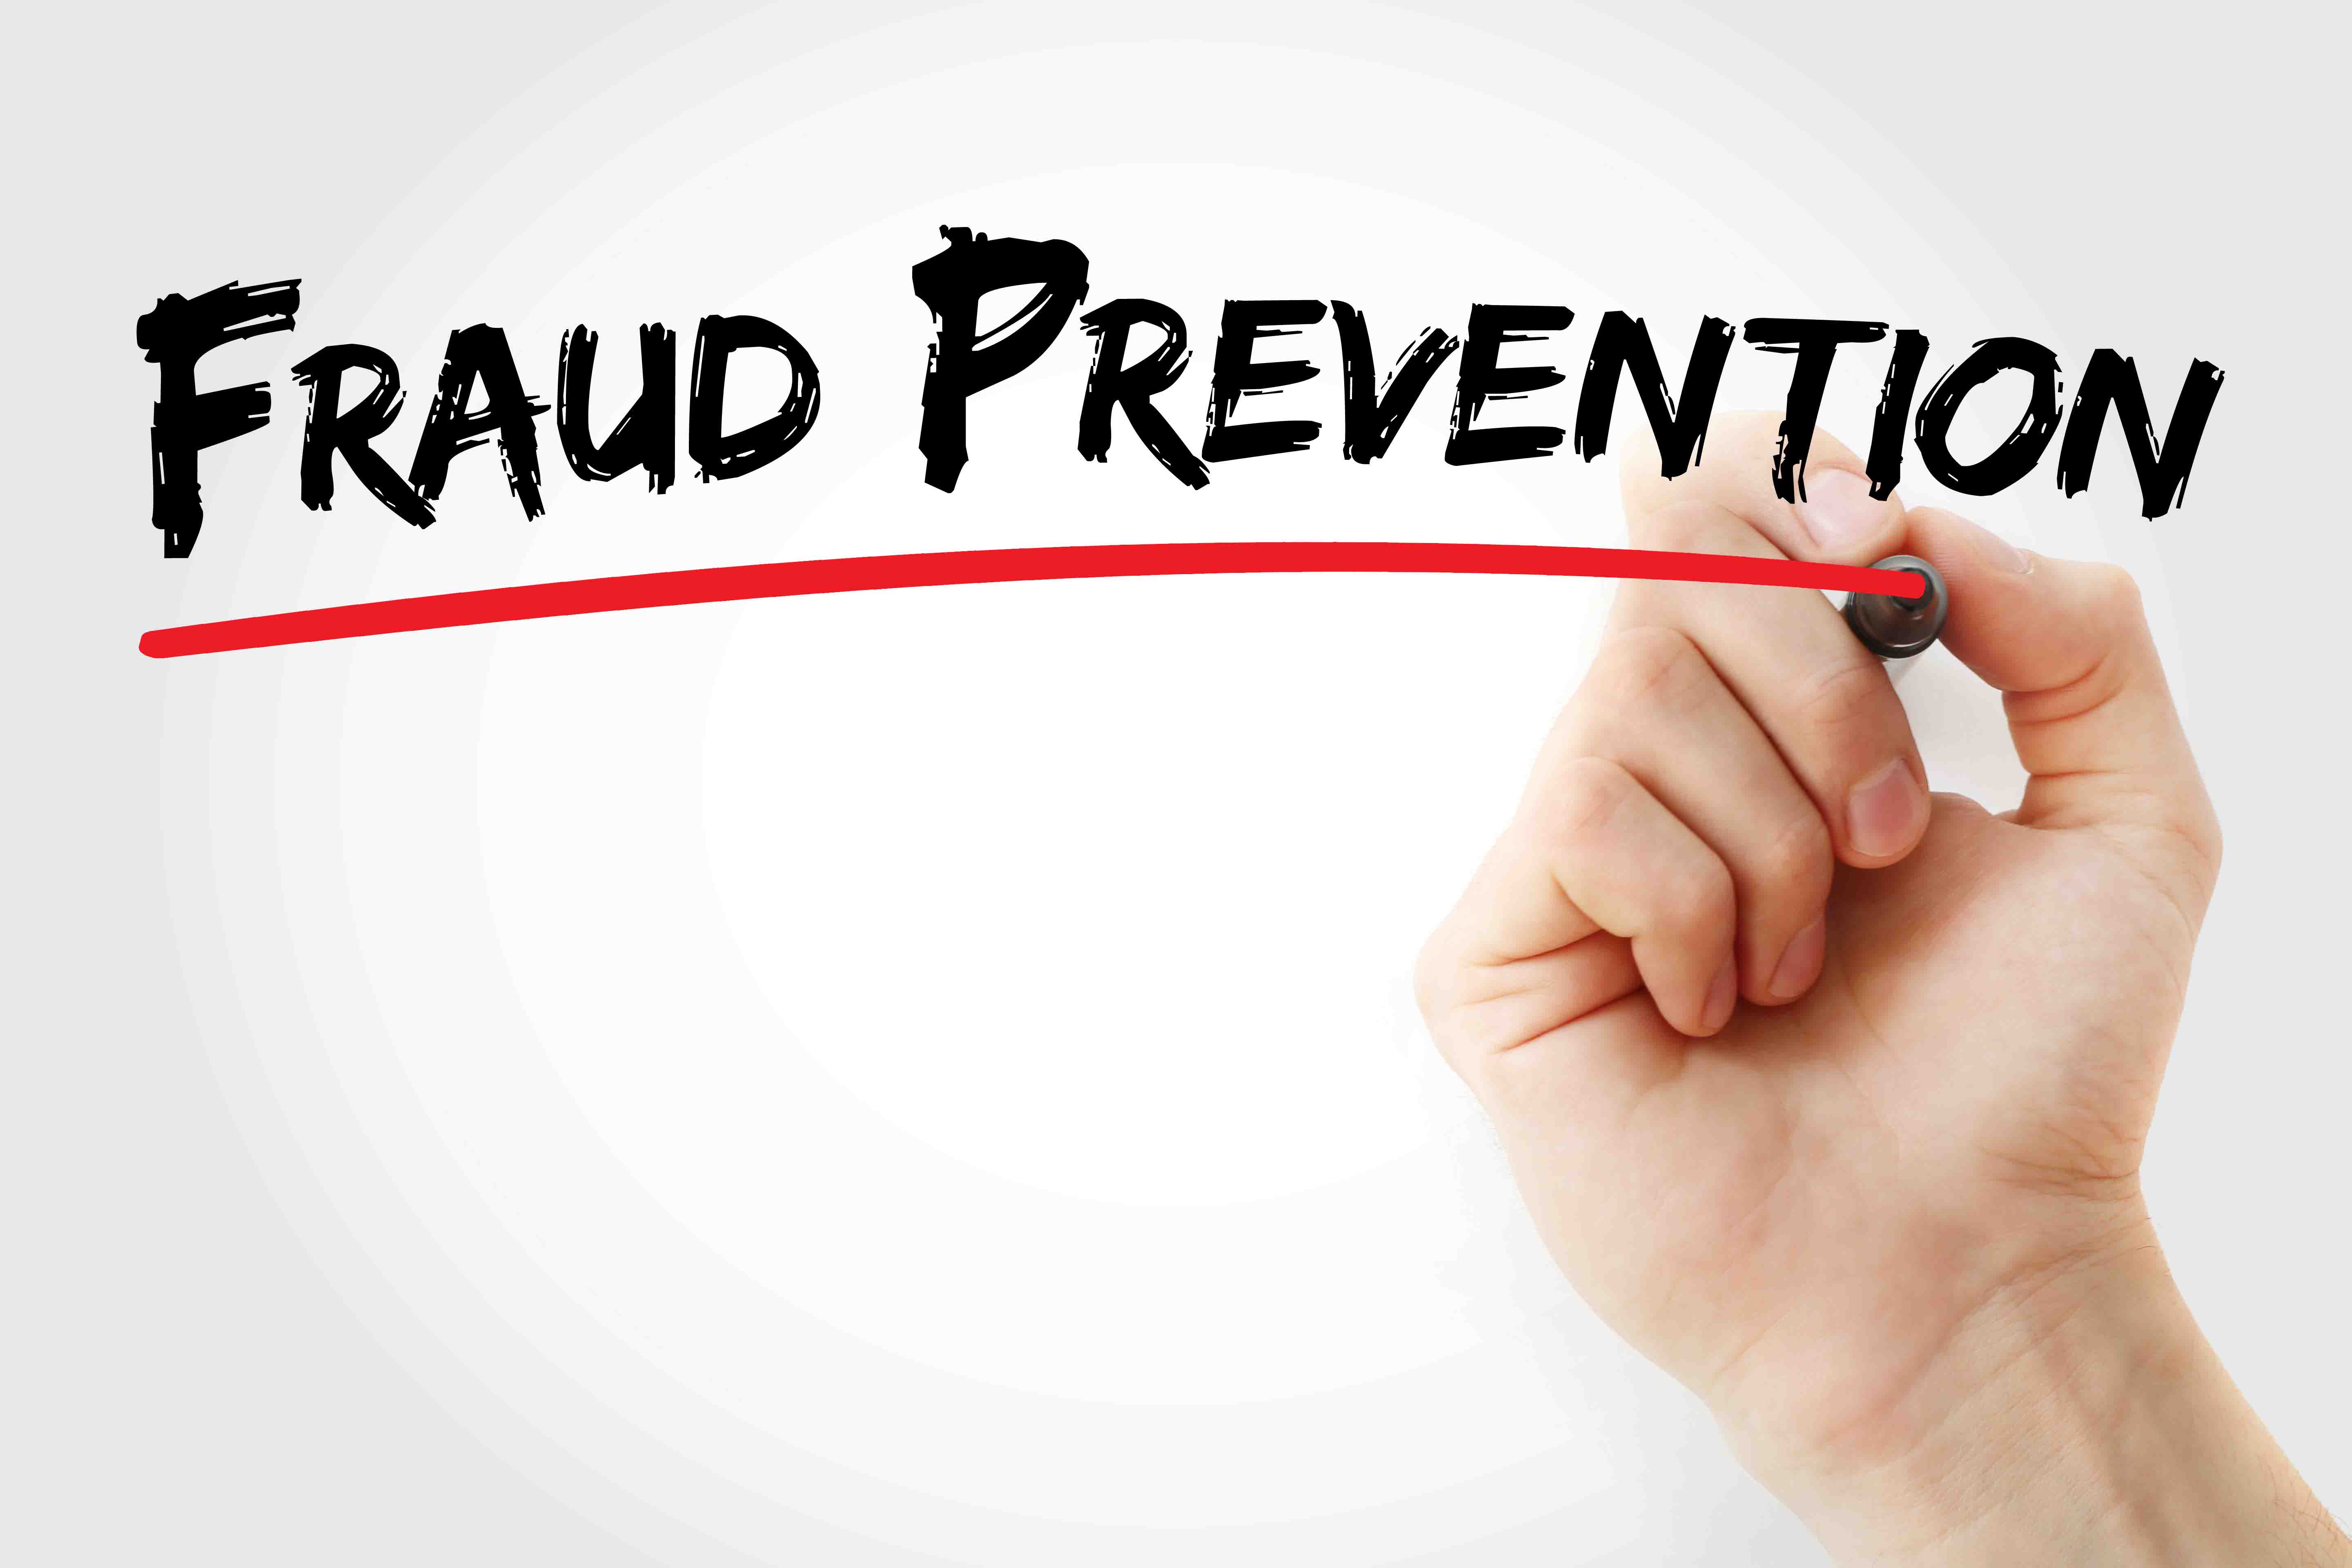 Fraud Prevention in writing